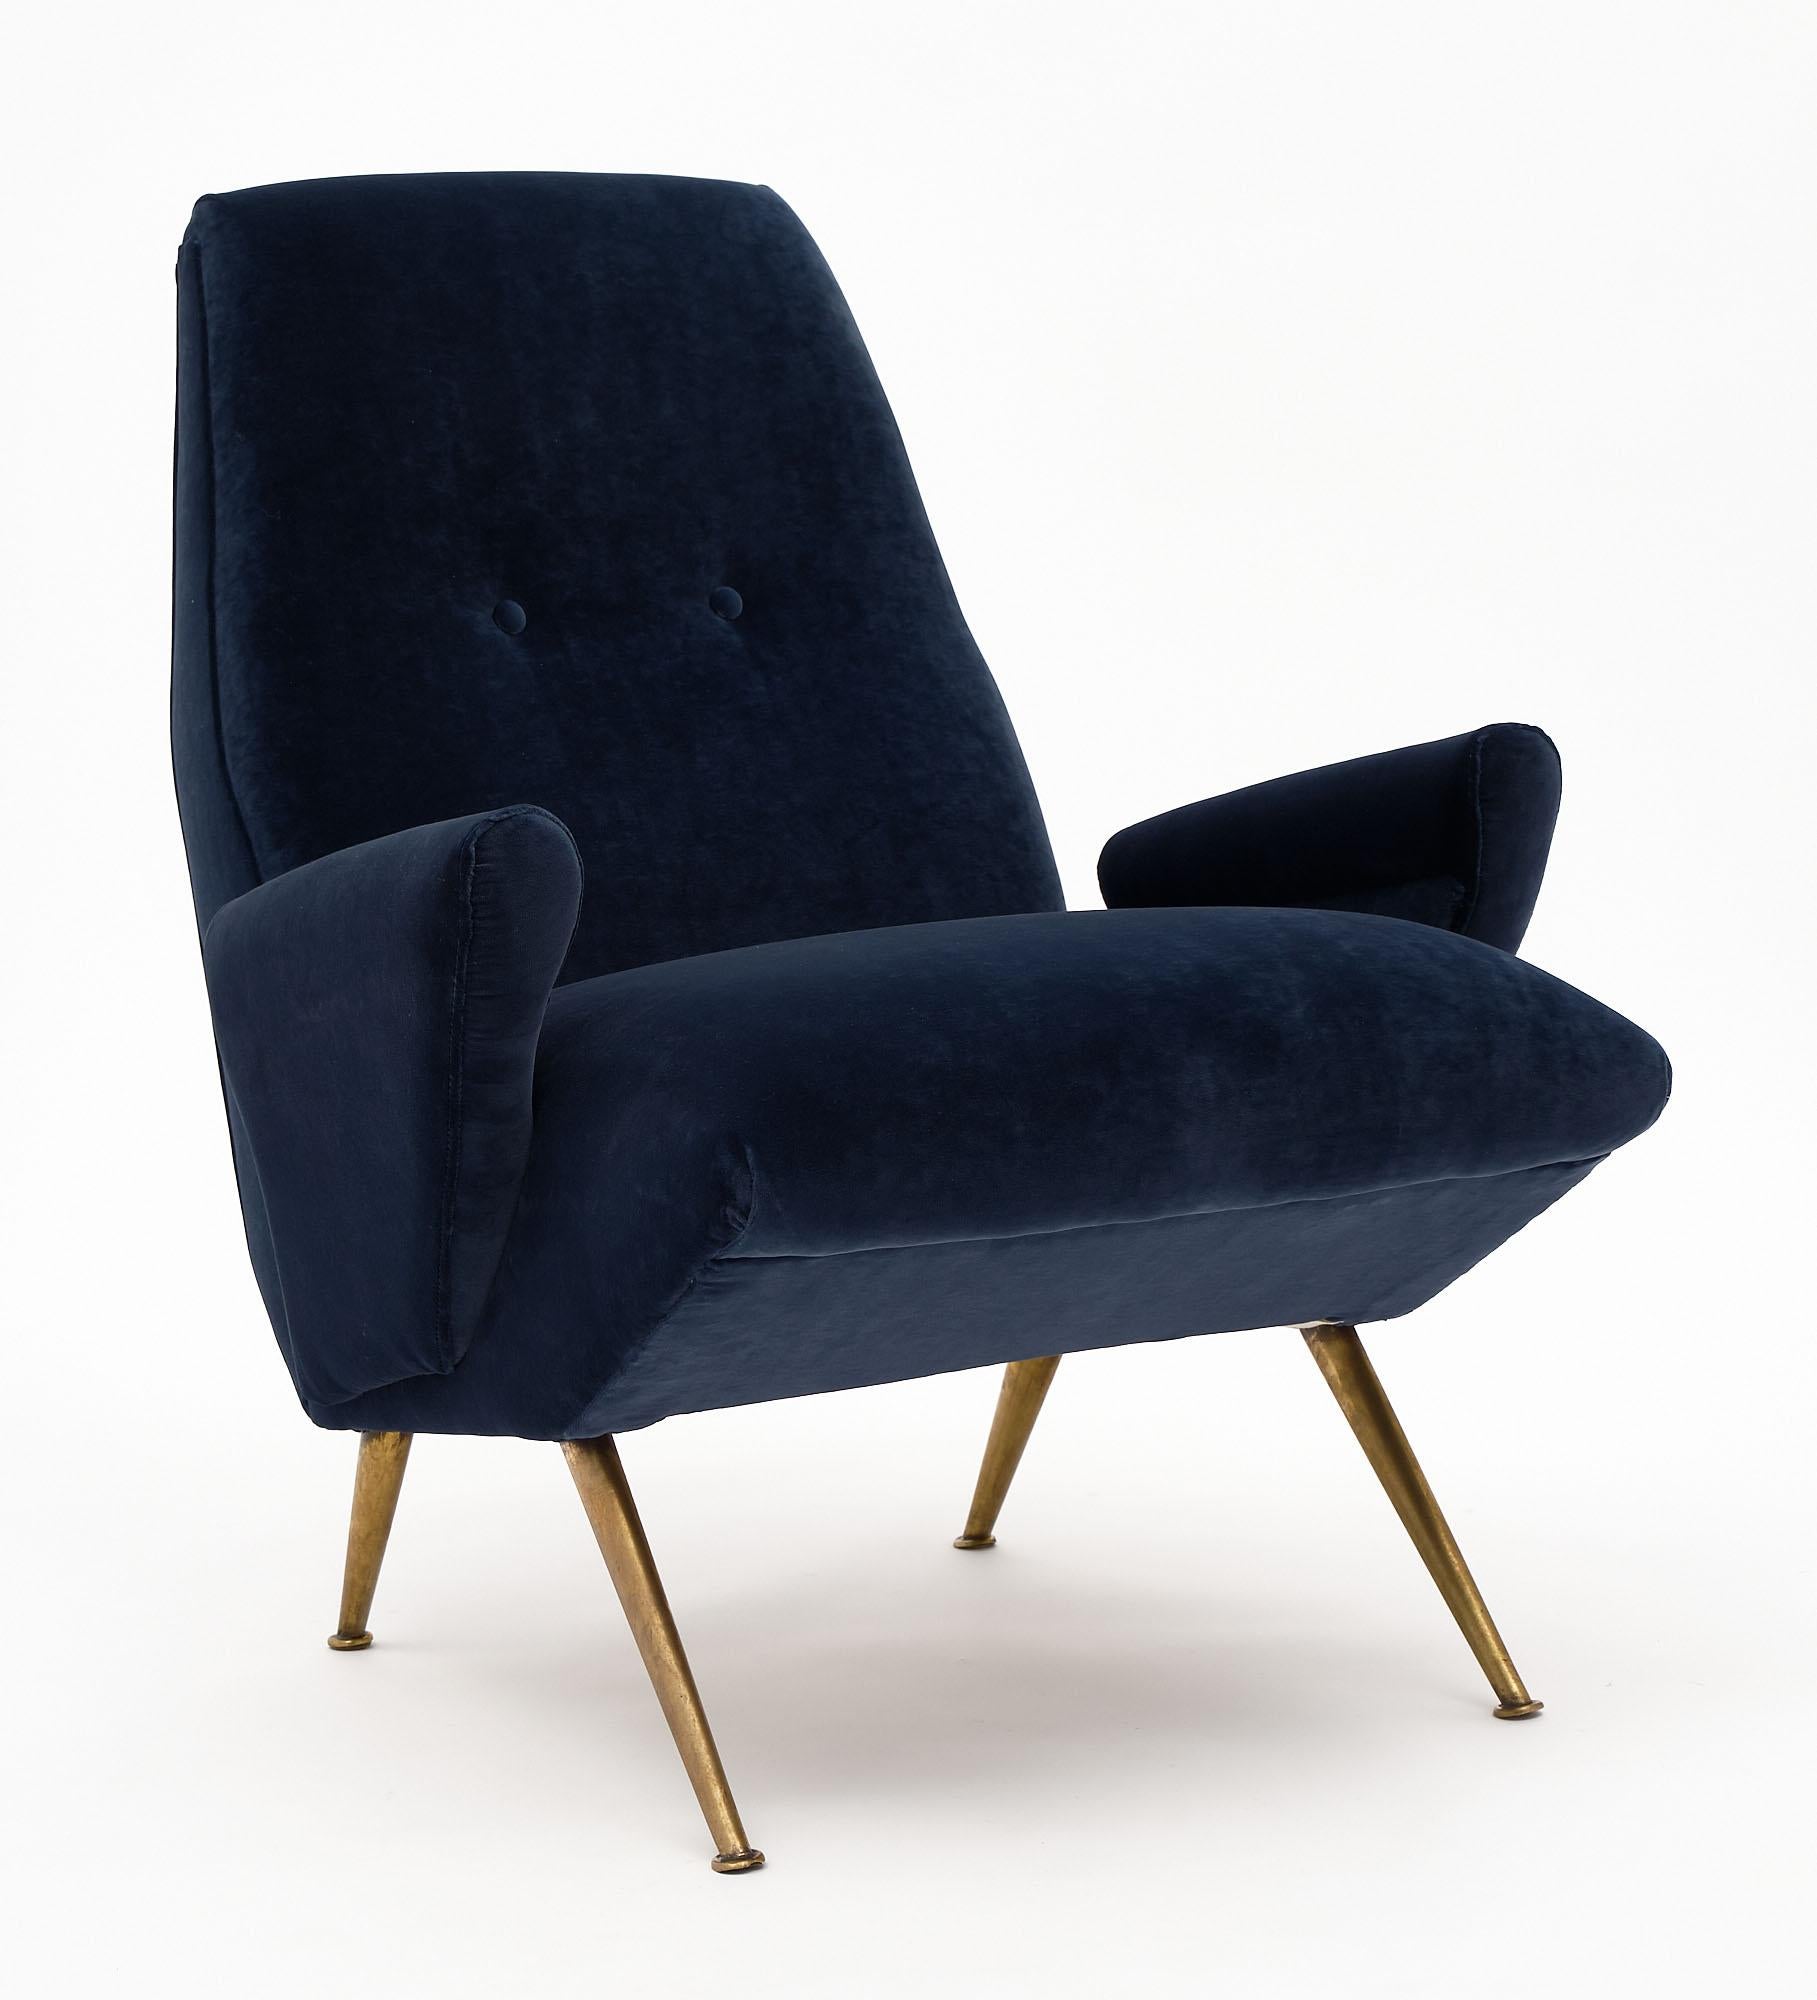 Set of vintage Italian seating by designer Nino Zoncada. This set is from Milan and includes two armchairs and a sofa. They have been newly upholstered in a navy blue velvet blend. We love the solid gilt brass legs and strong lines. The dimensions